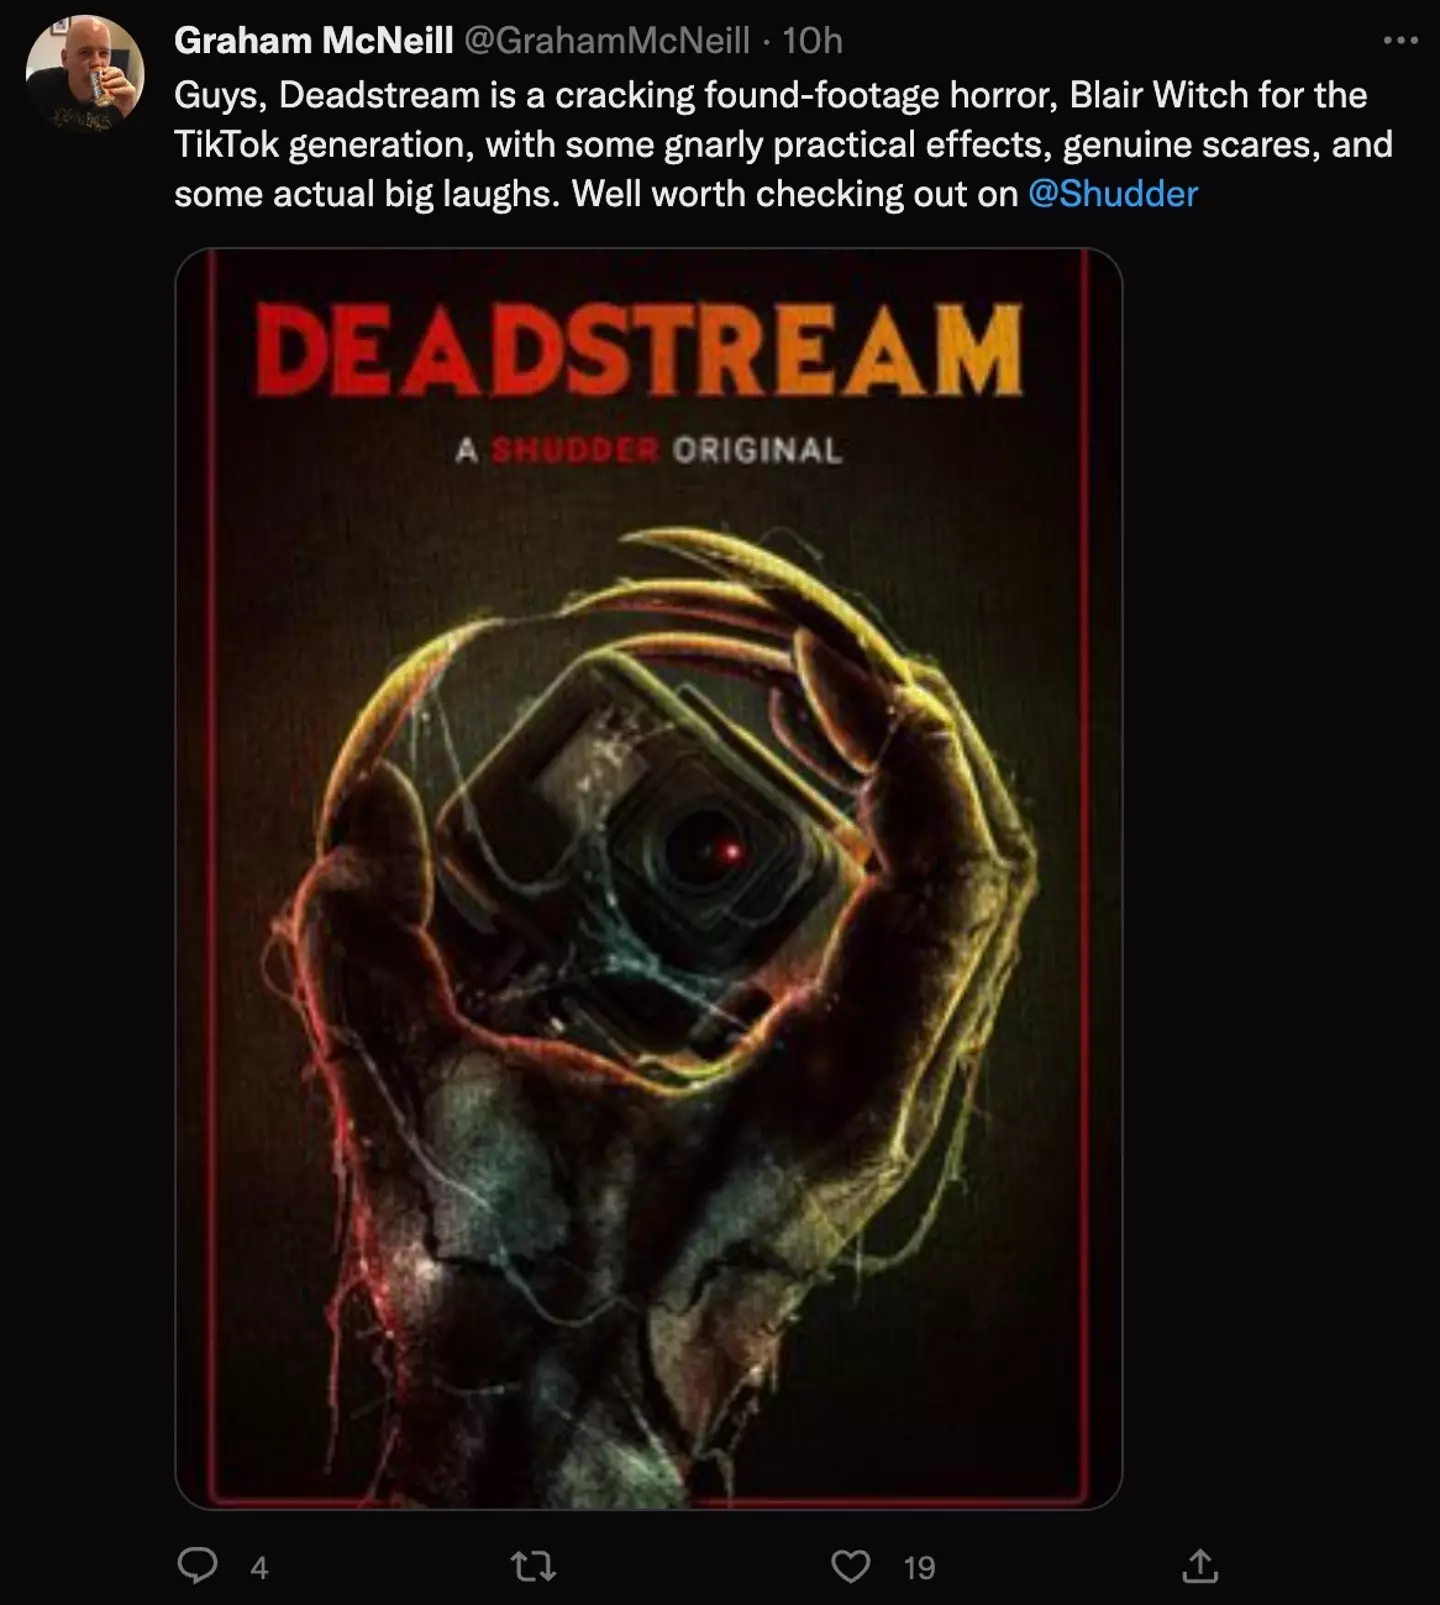 Deadstream has been praised by horror experts.